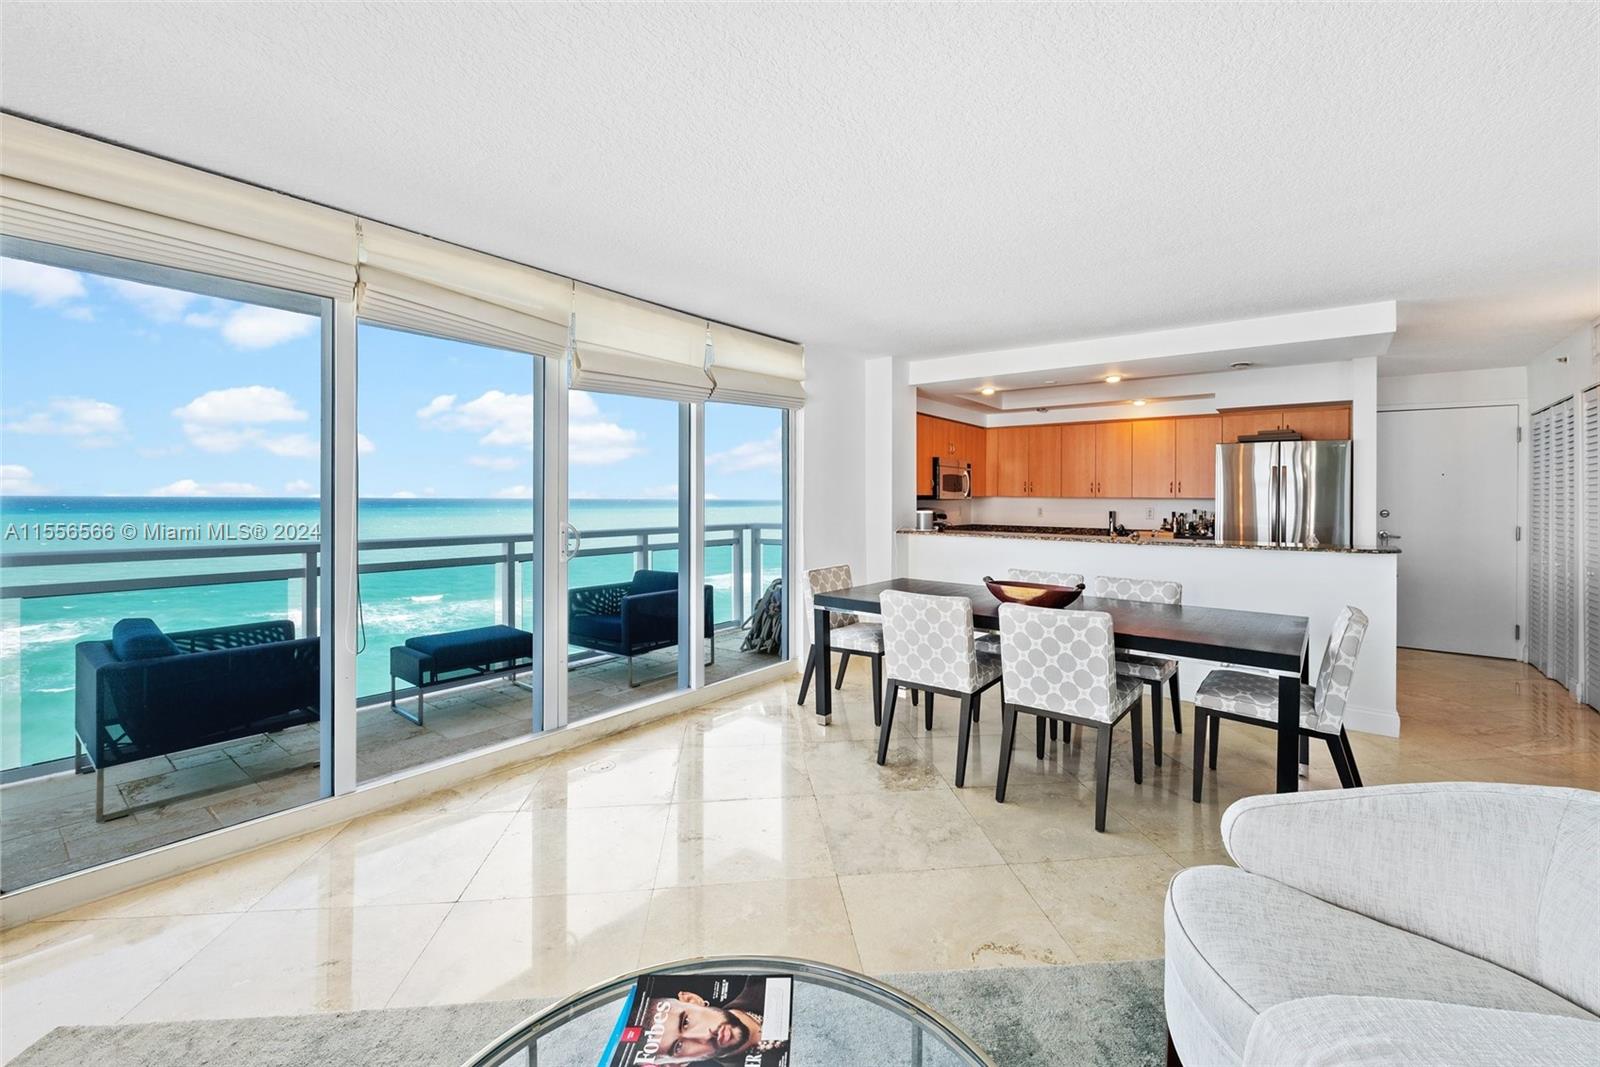 Listing Image 6917 Collins Ave #1402